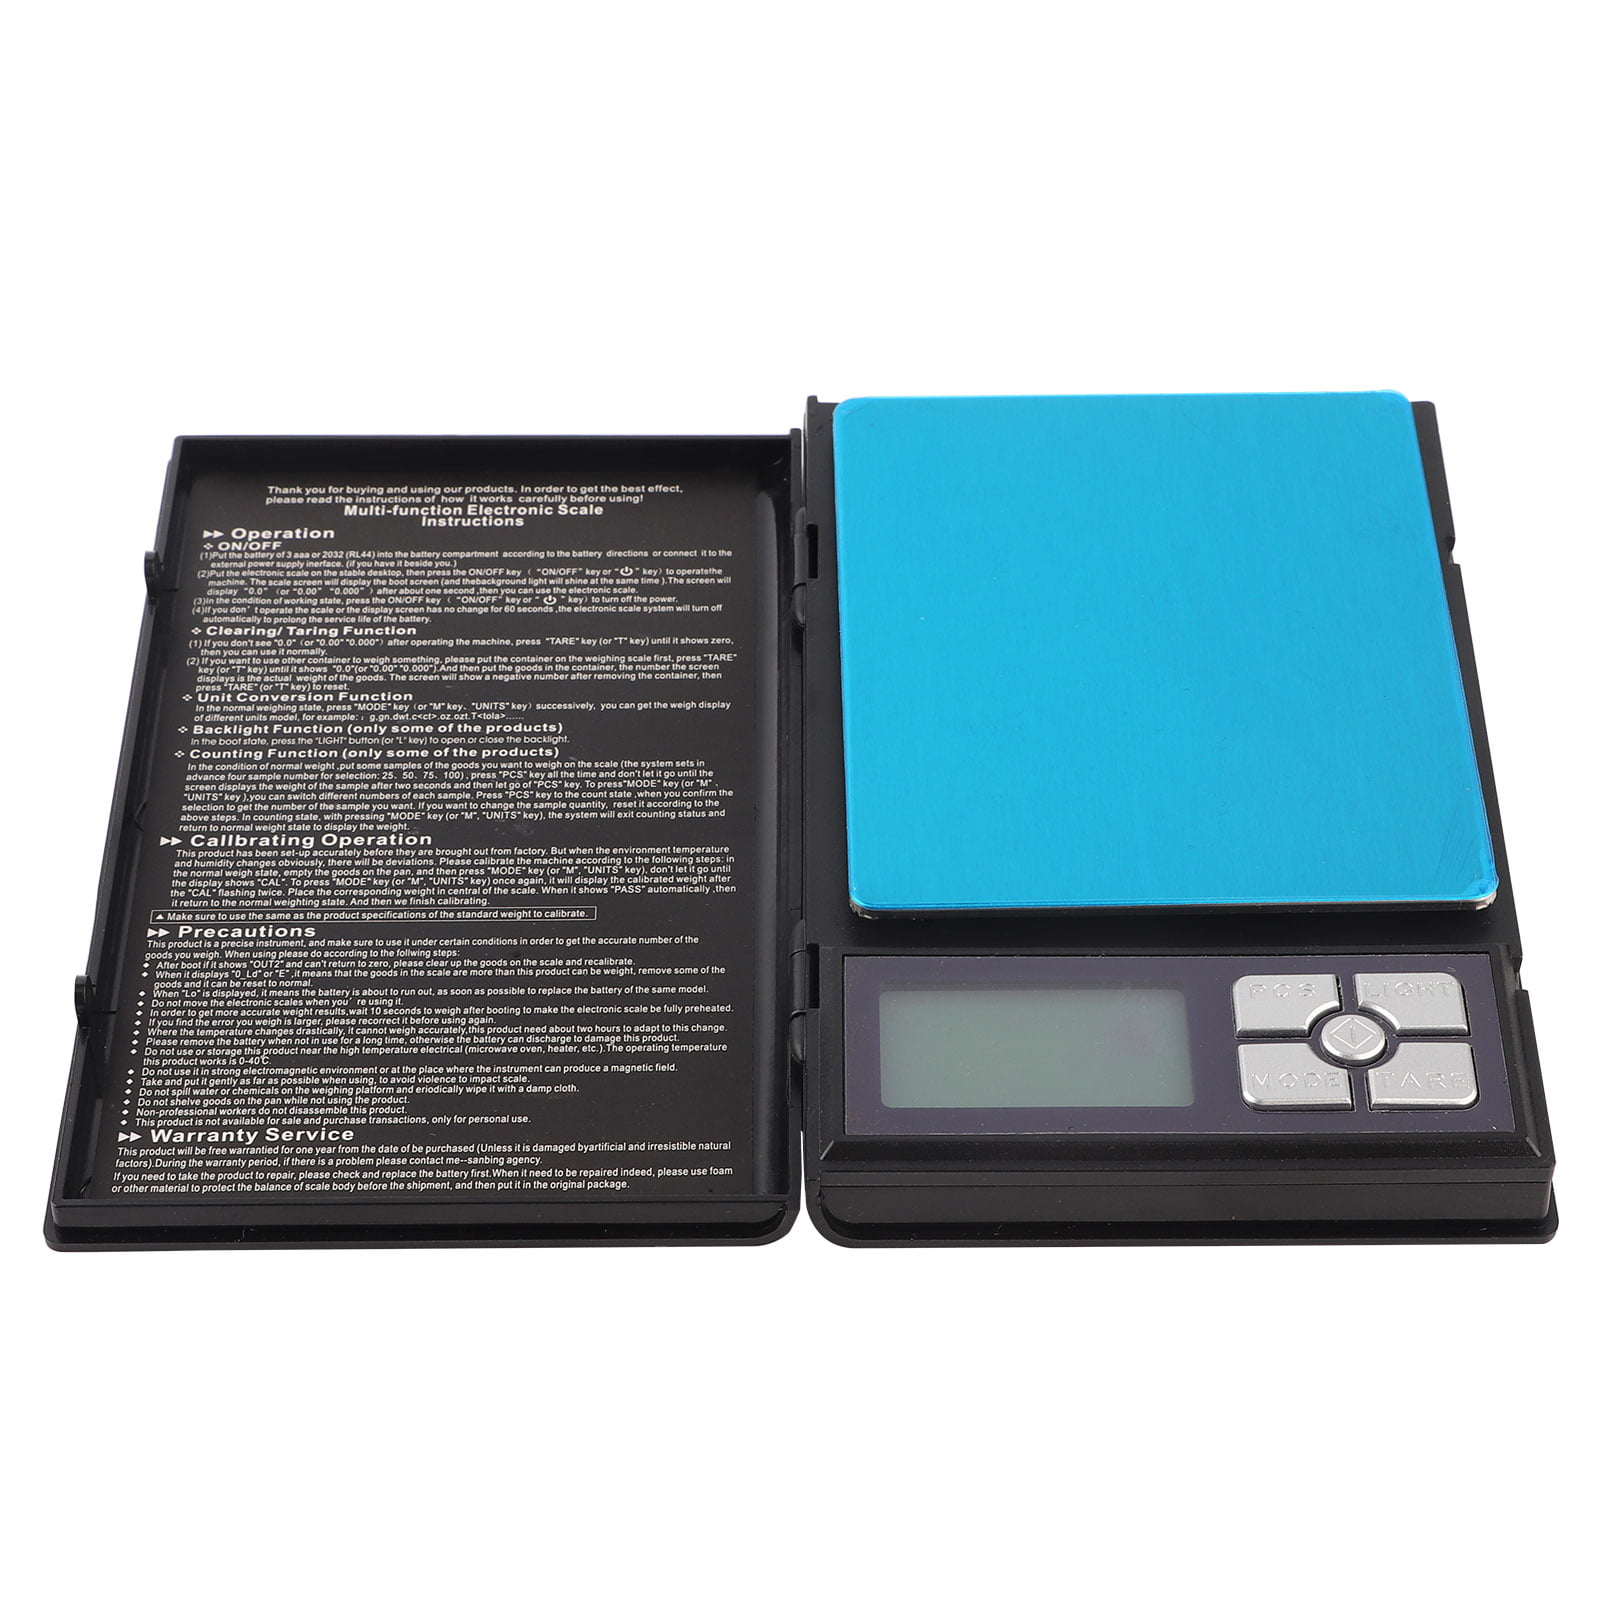 What is Digital Electronic Weighing Scale and How it works?